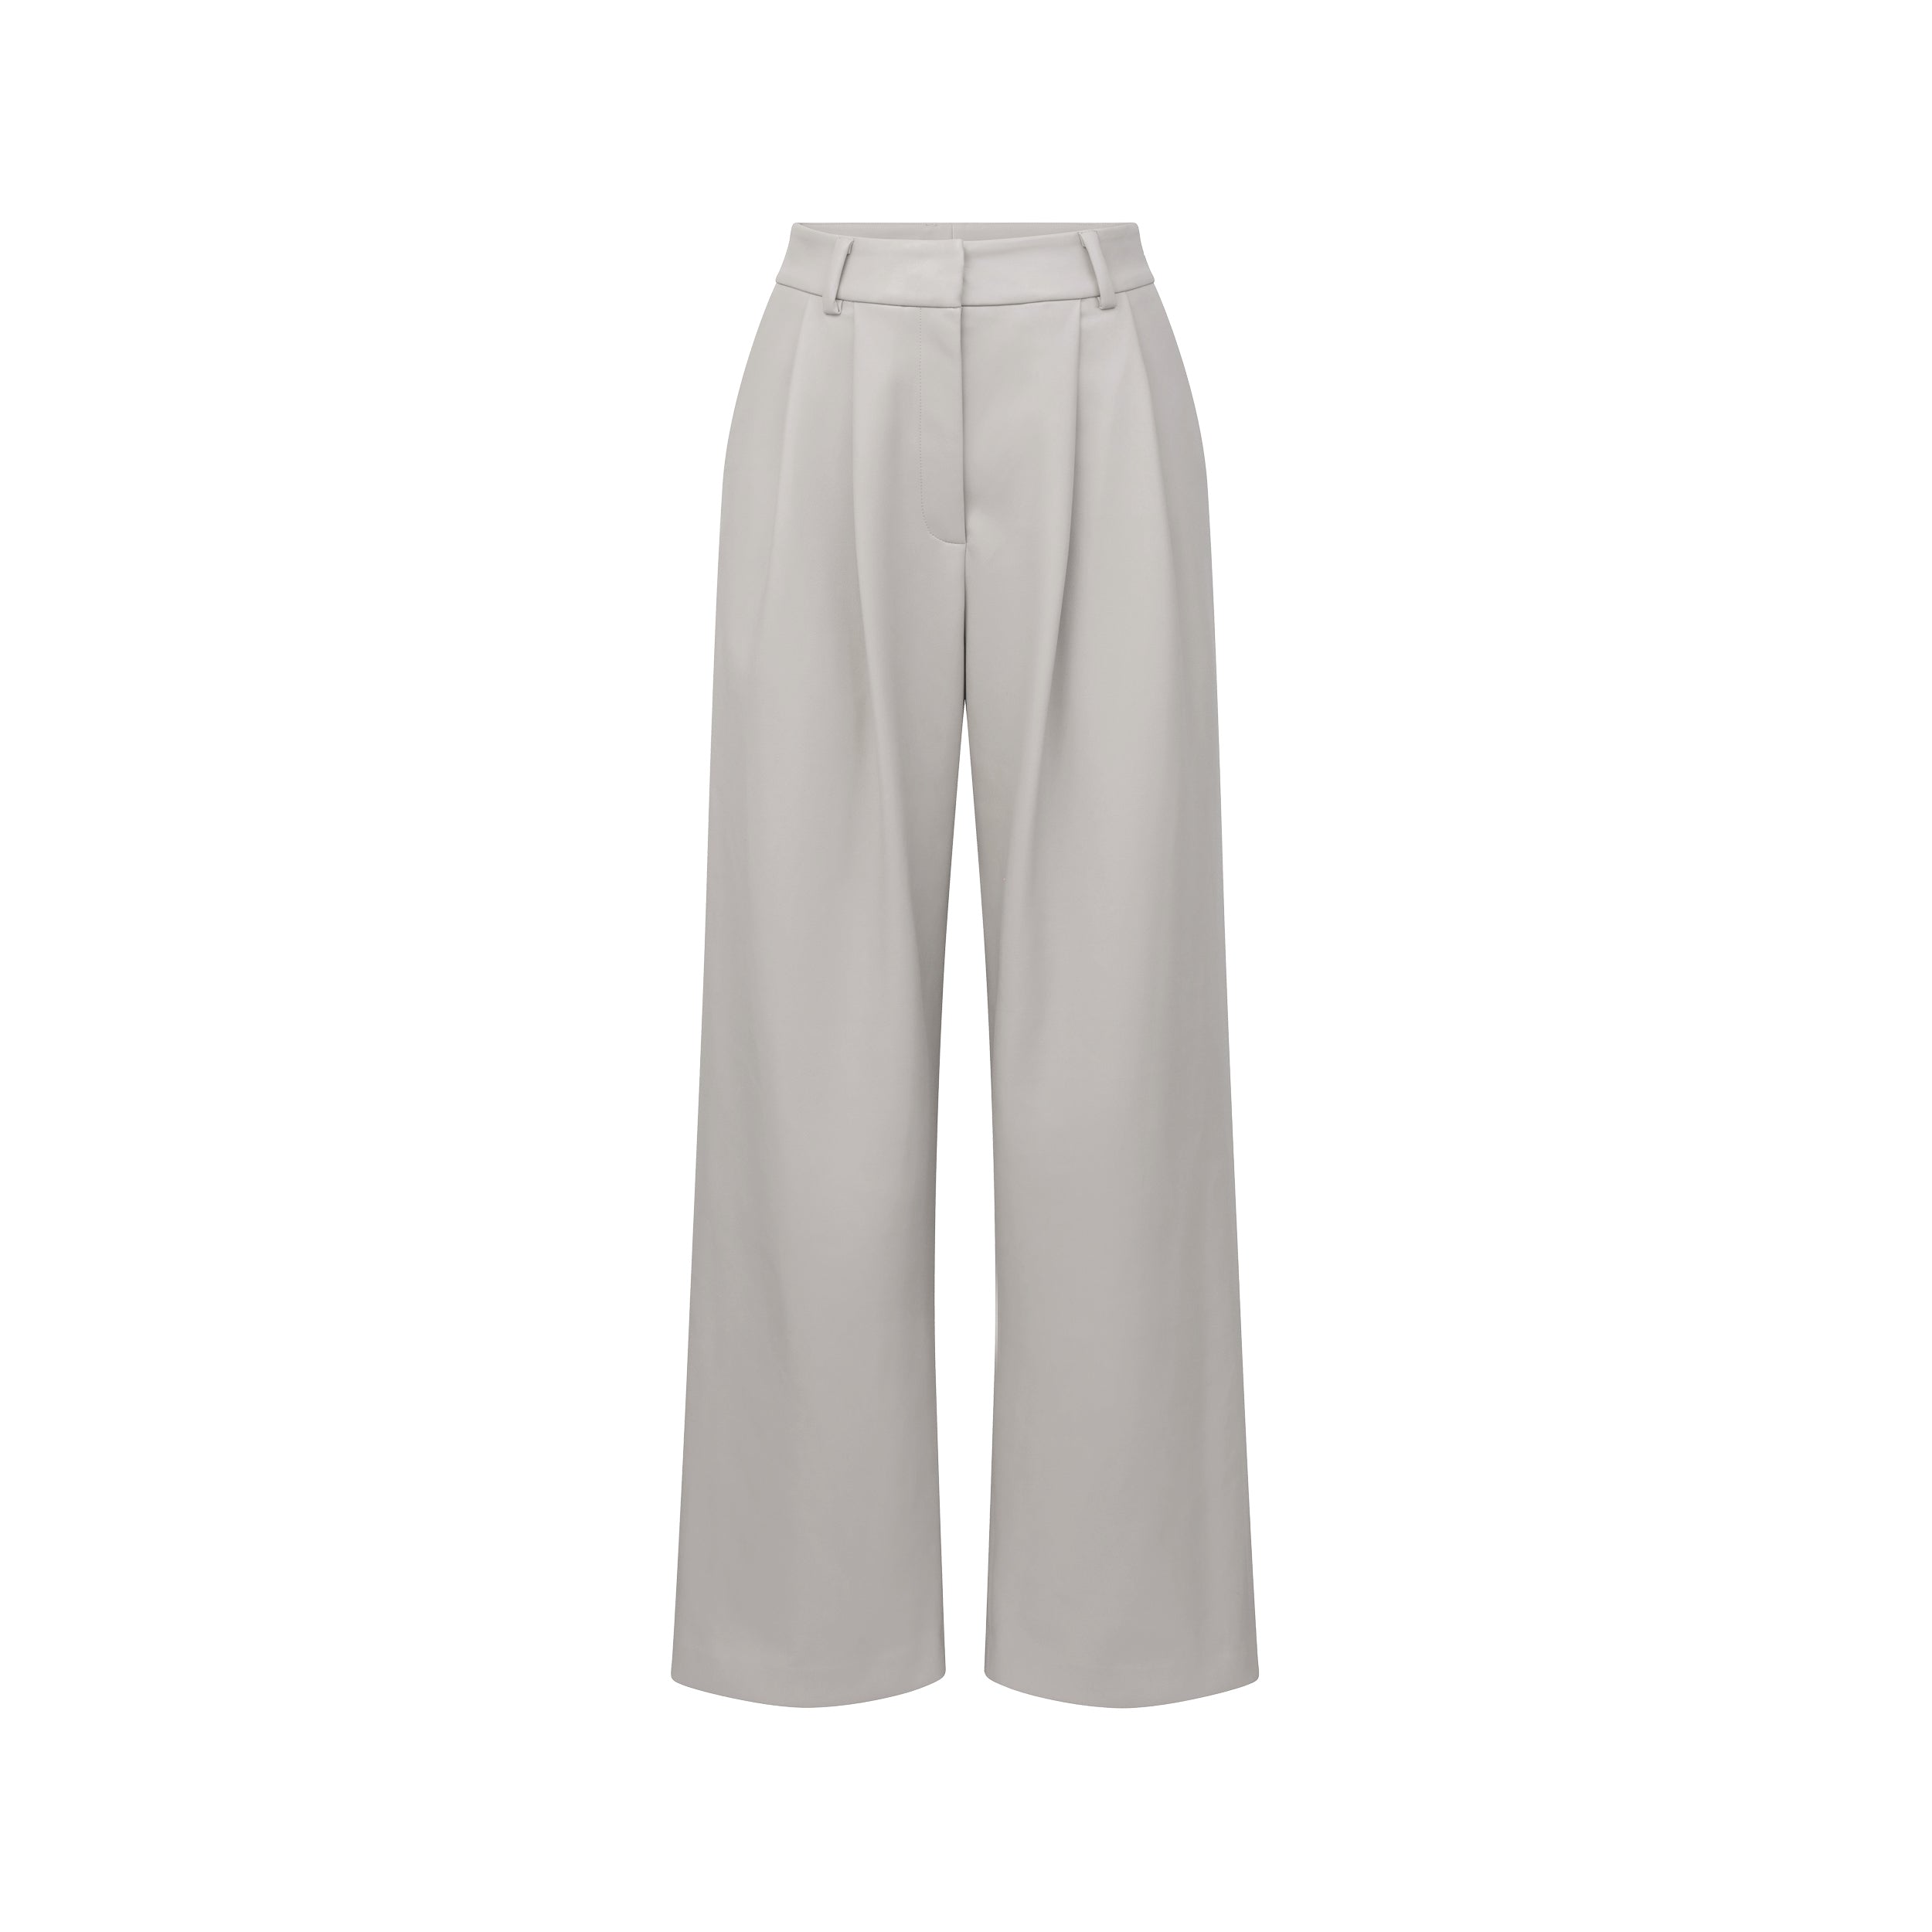 Product shot of pleated high rise faux leather beige colored trouser.